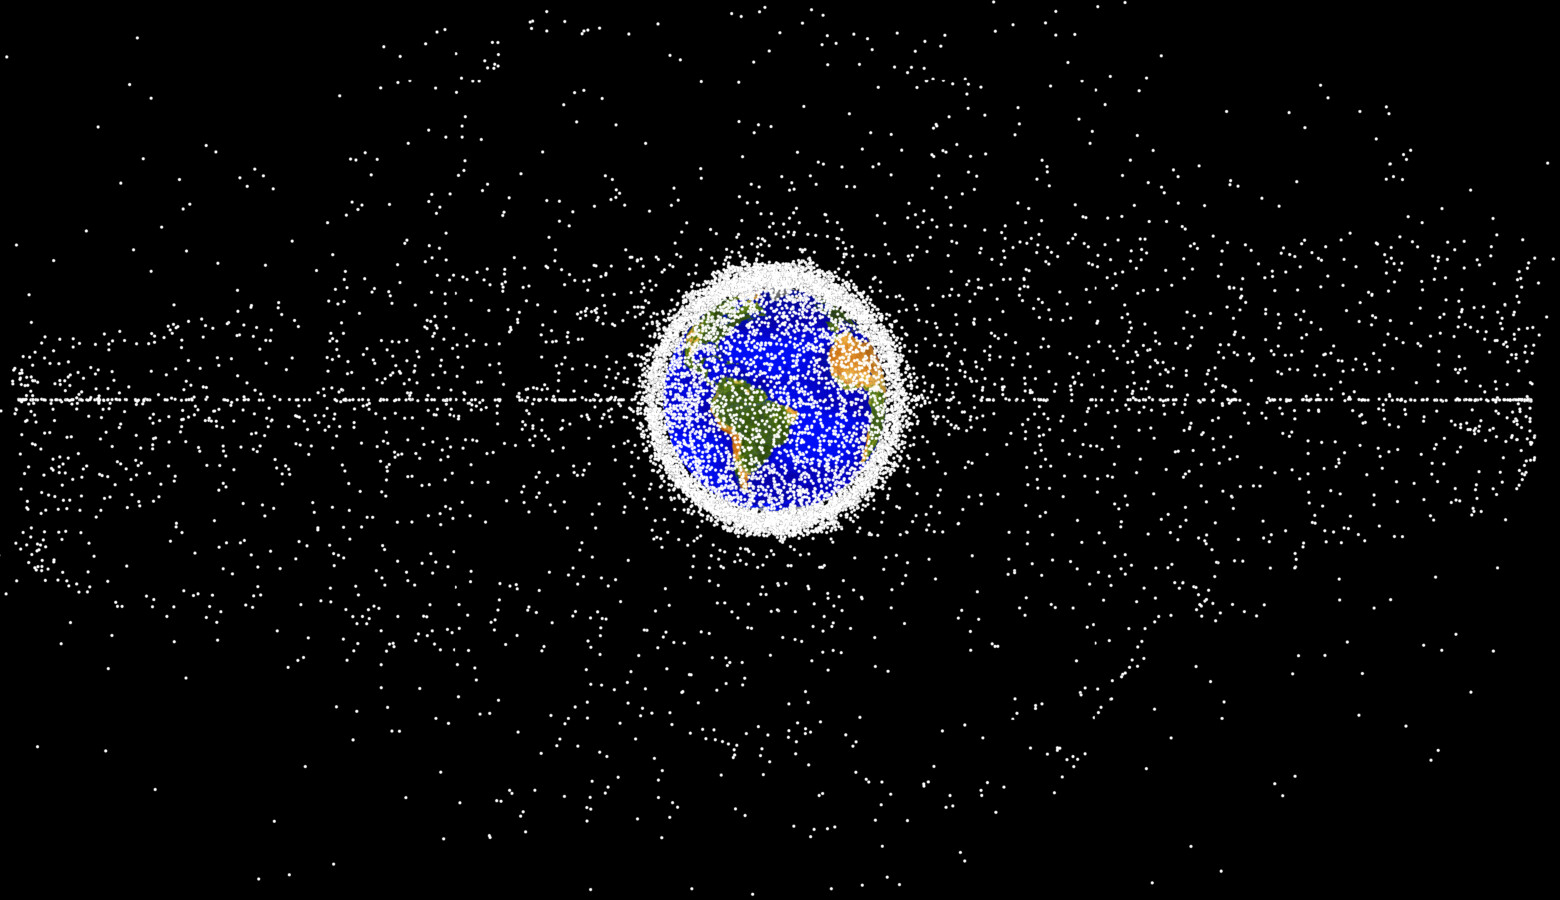 Things like old satellites and booster rockets have put hundreds of millions of pieces of litter in Earth’s orbital space. (Courtesy of NASA's Orbital Debris Program Office)